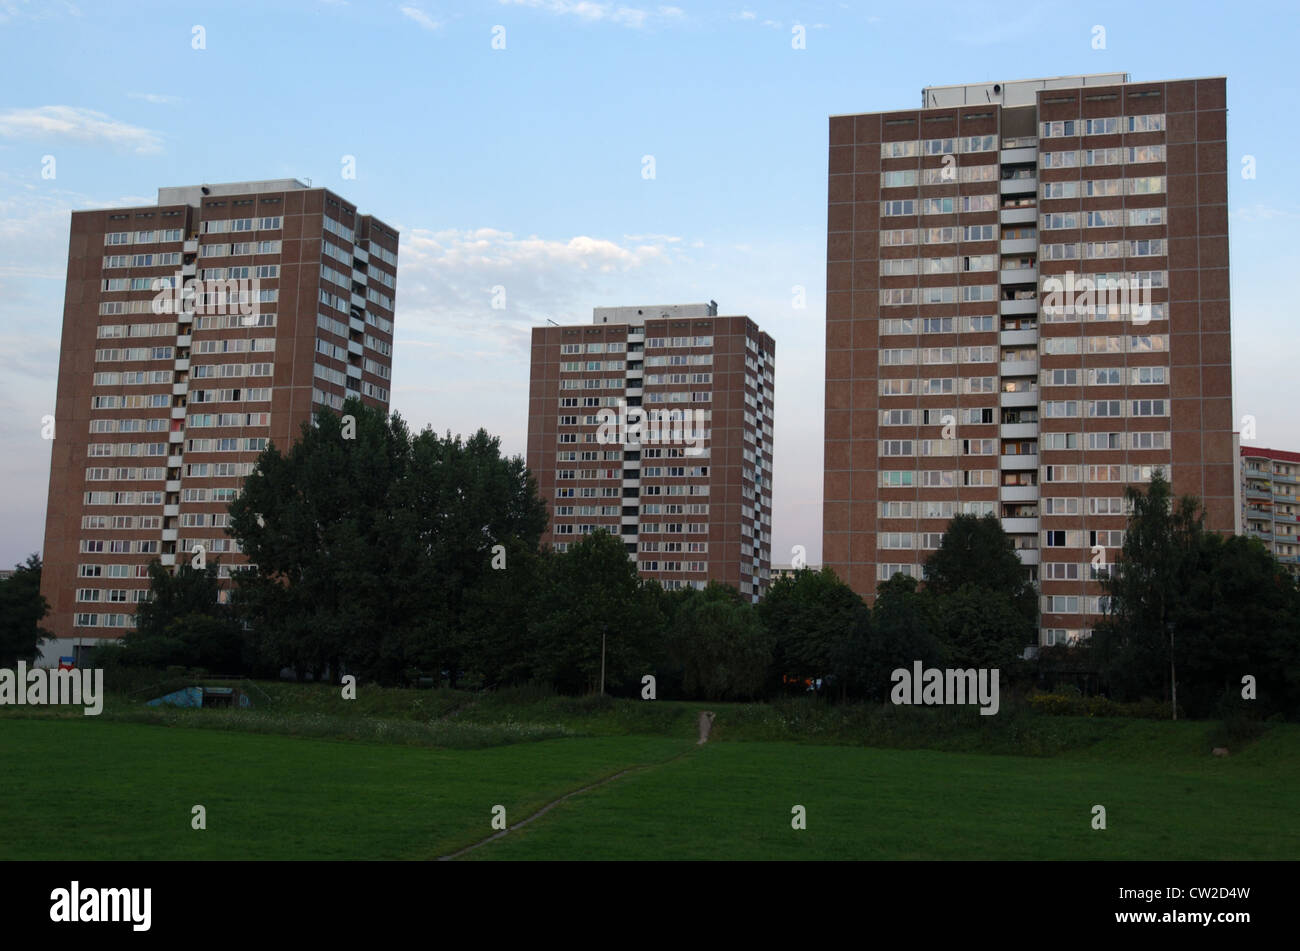 Housing estate in the Berlin district of Marzahn Stock Photo